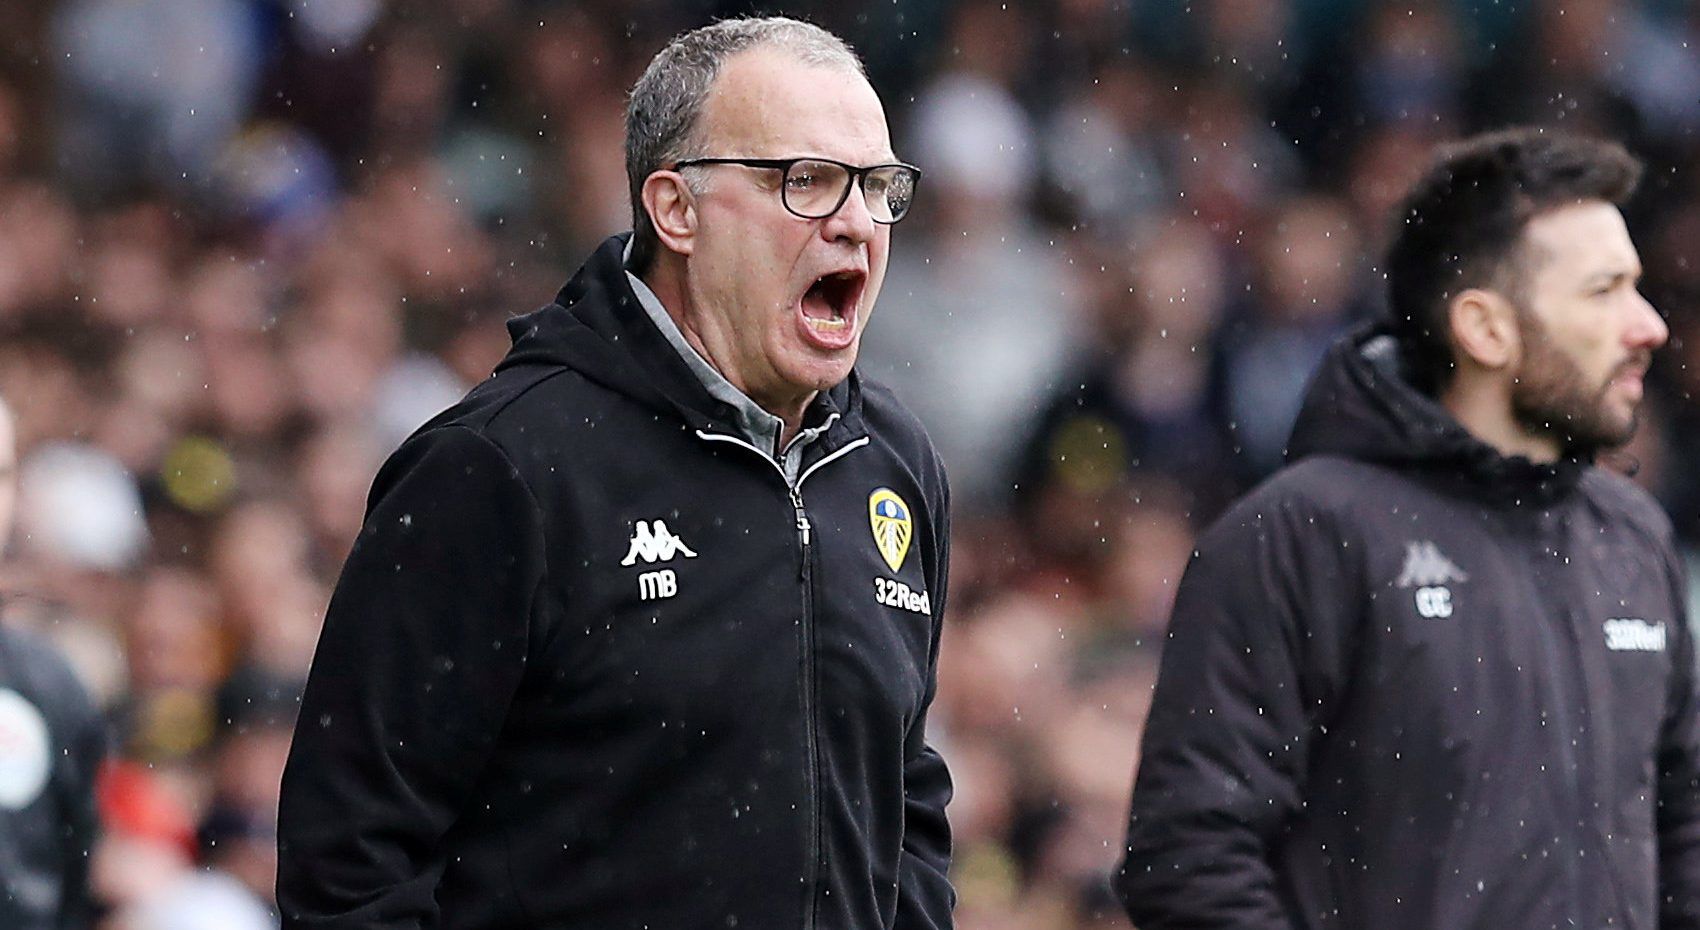 Soccer Football - Championship - Leeds United v Sheffield United - Elland Road, Leeds, Britain - March 16, 2019   Leeds United manager Marcelo Bielsa reacts   Action Images/John Clifton    EDITORIAL USE ONLY. No use with unauthorized audio, video, data, fixture lists, club/league logos or 